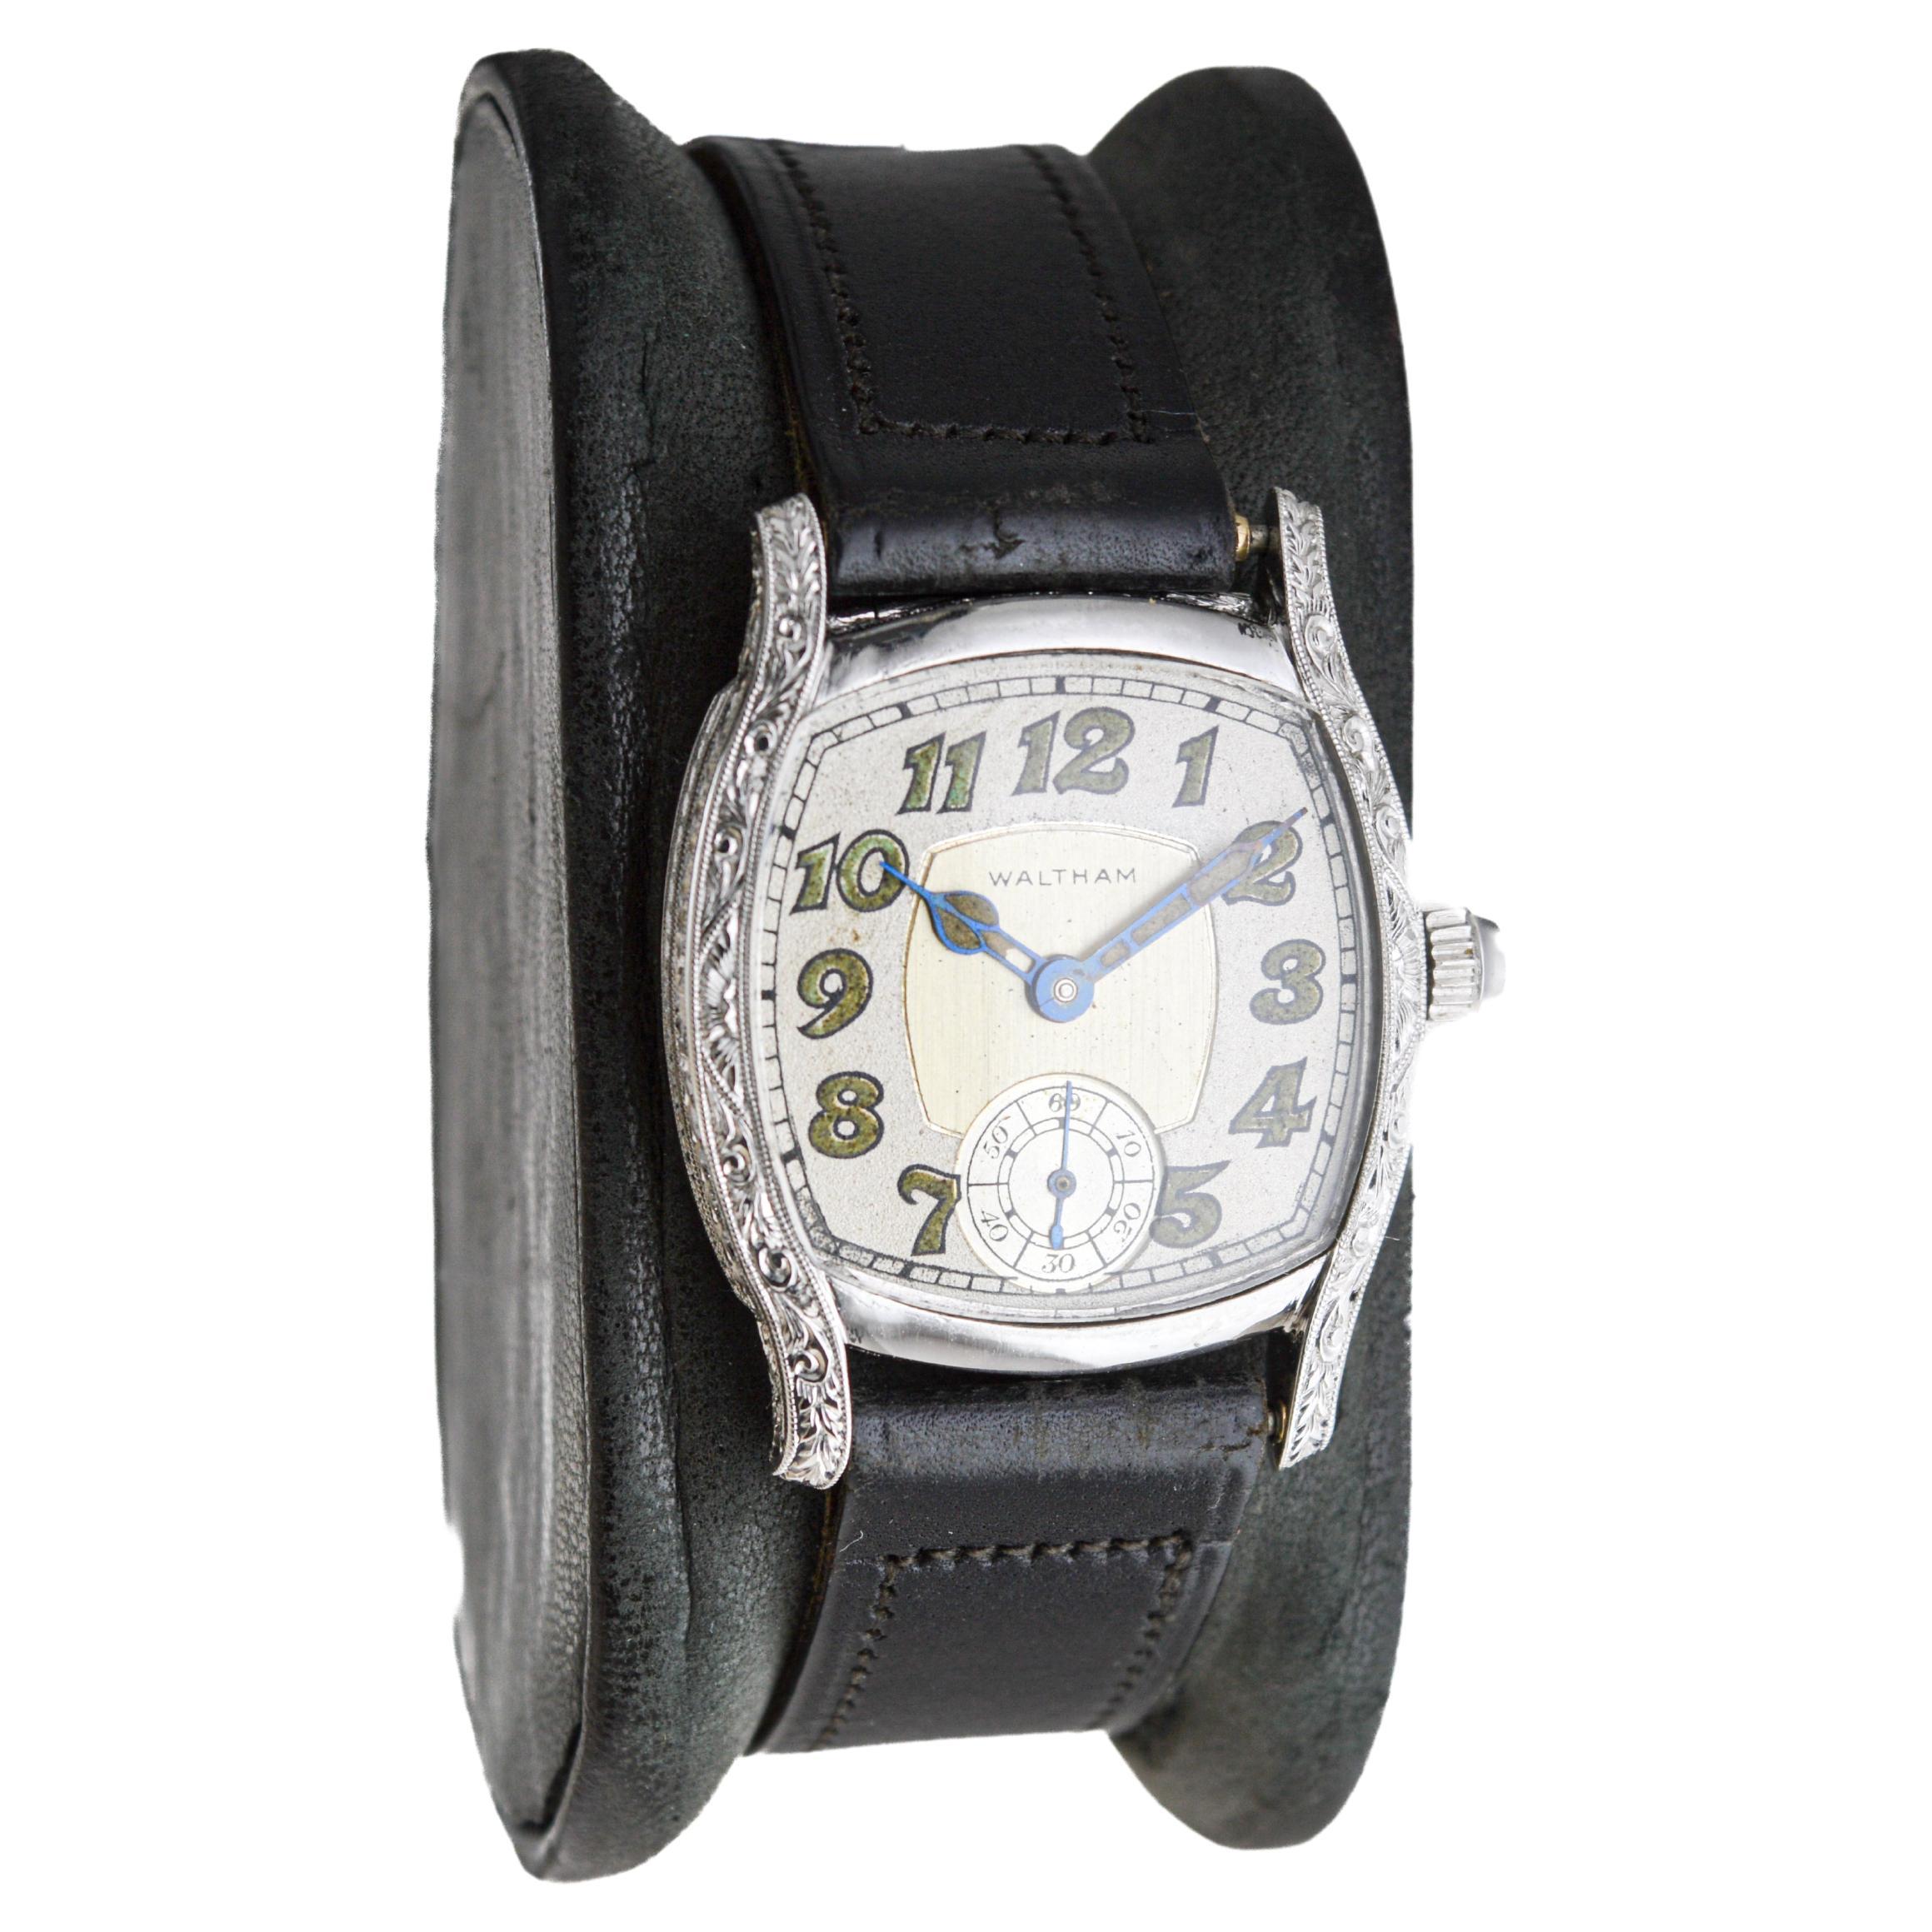 FACTORY / HOUSE: Waltham Watch Company
STYLE / REFERENCE: Art Deco / Cushion Shape
METAL / MATERIAL: Platinum
CIRCA / YEAR: 1934
DIMENSIONS / SIZE: Length 27mm X Width 35mm
MOVEMENT / CALIBER: Manual Winding / 21 Jewels / Caliber 6/0
DIAL / HANDS: